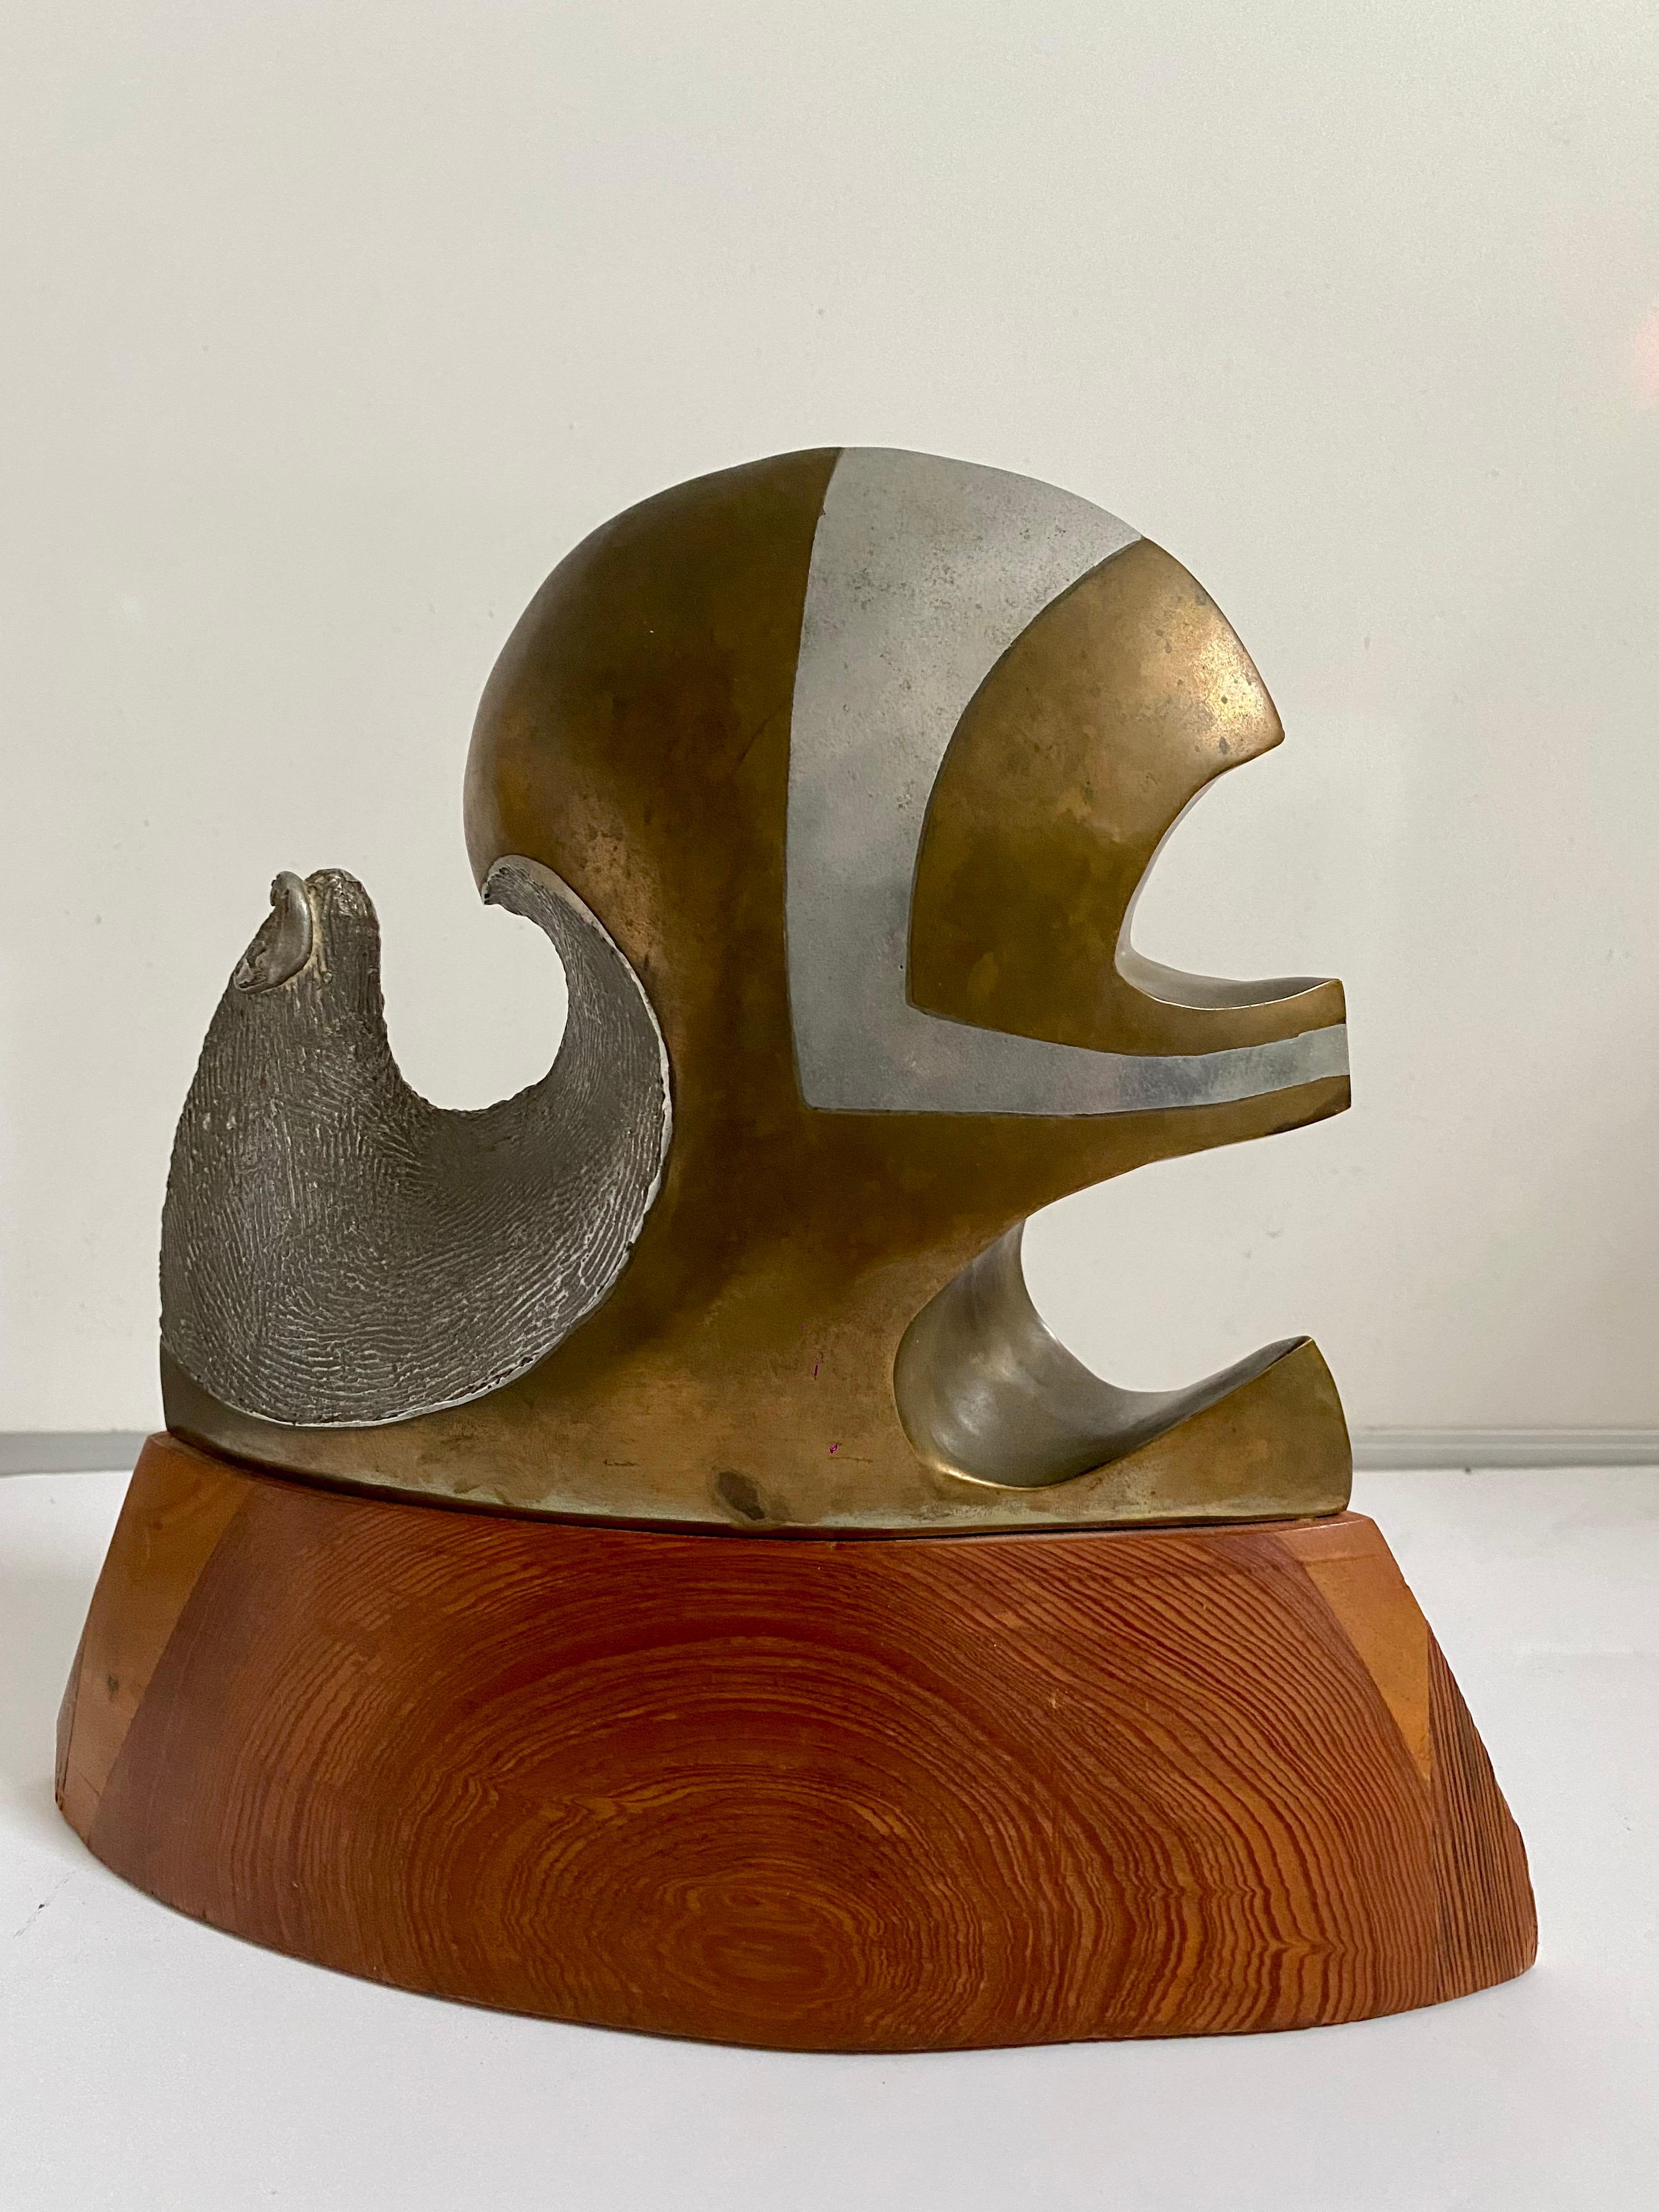 Chester L. Williams
Label on bottom, signed. Title: Promethium
Medium: Bronze, Aluminum and wood. 
Approx. dimensions: 12 X 11 X 4 inches. 

Chester Lee Williams (1944-1919) was born in 1944, in Durham, North Carolina. Chester cultivated a creative